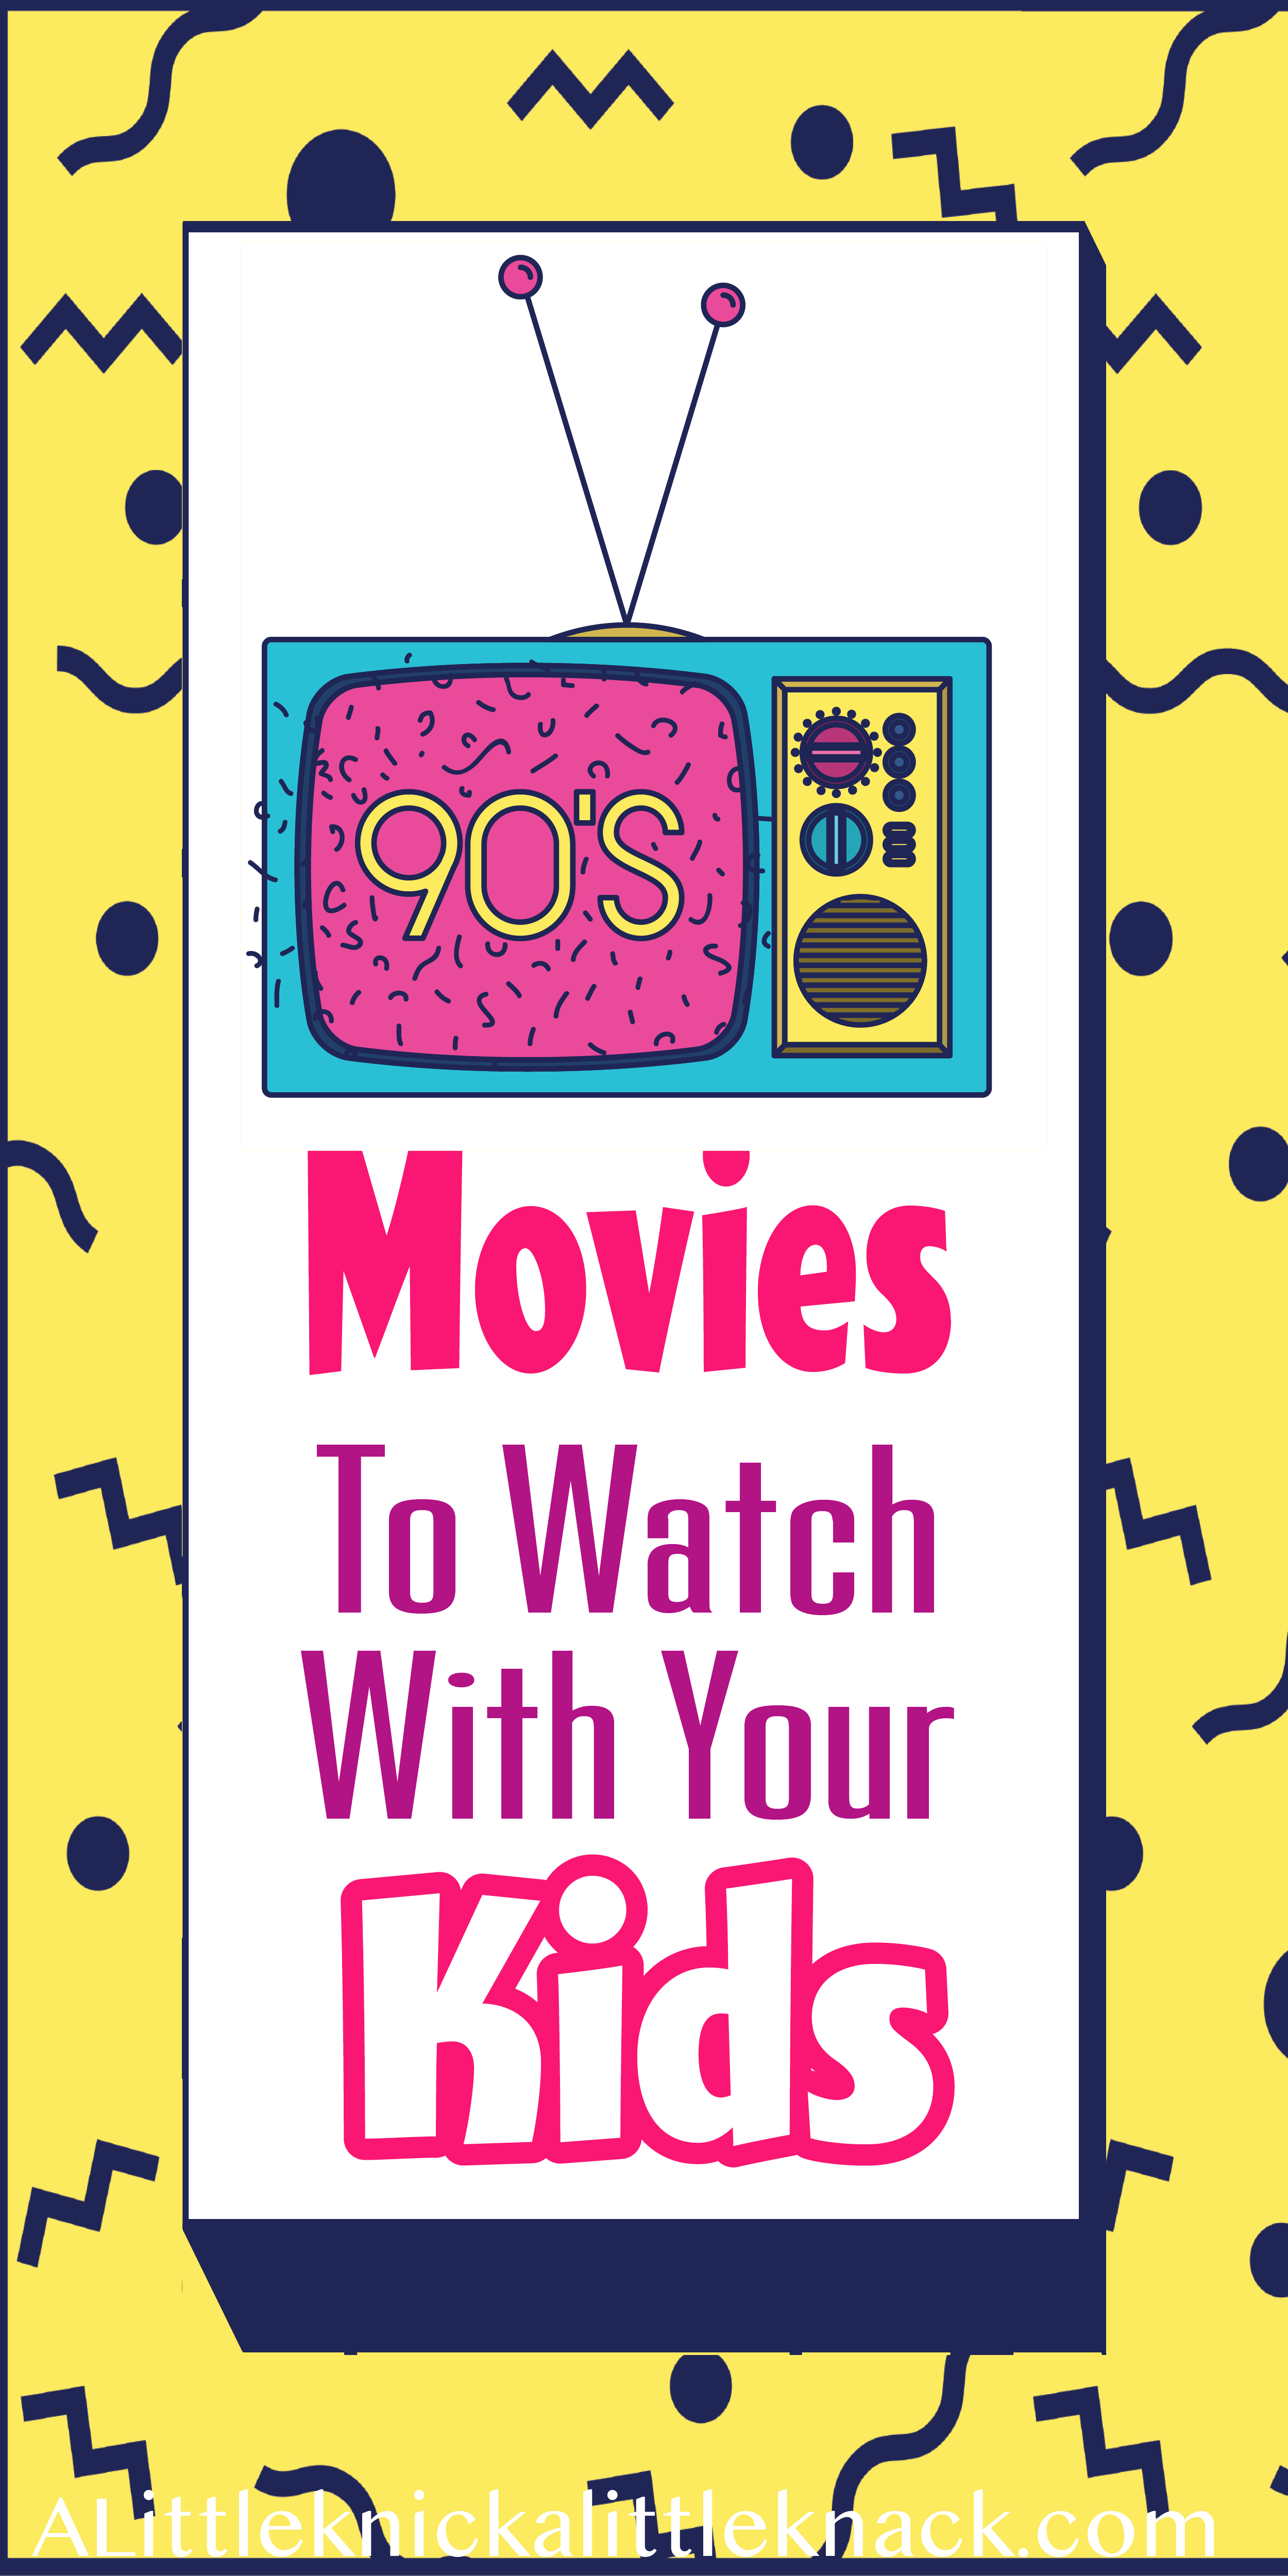 Yellow and black vector background and pink and teal retro TV drawing with text overlay